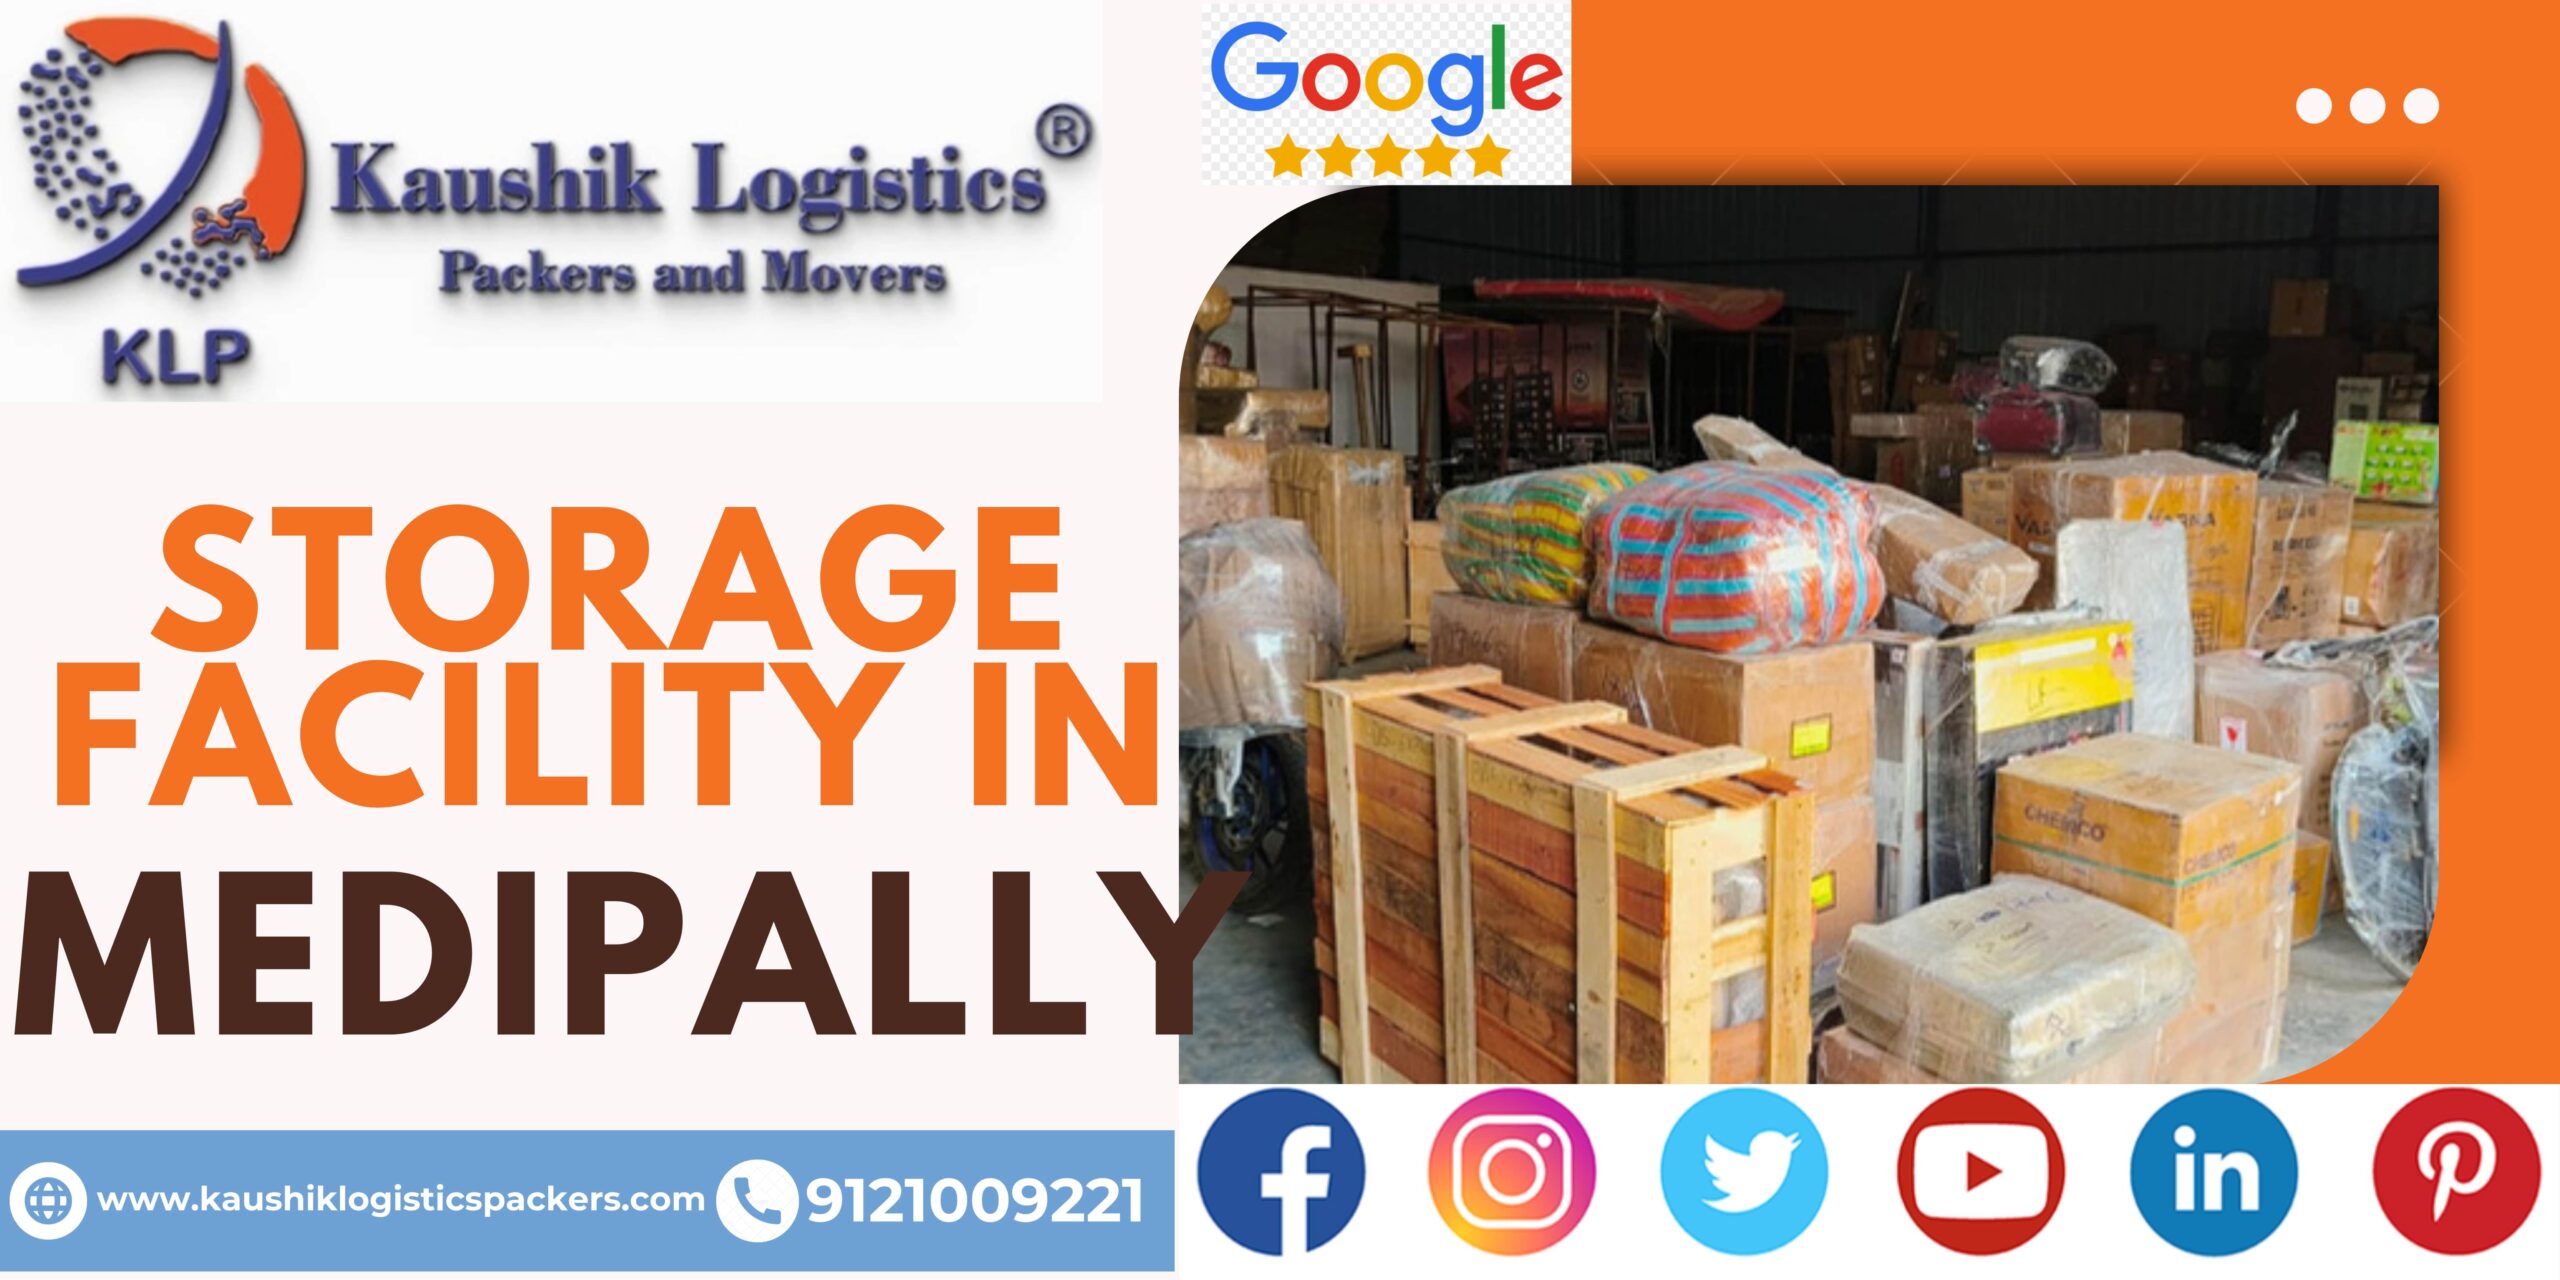 Packers and Movers In Medipally